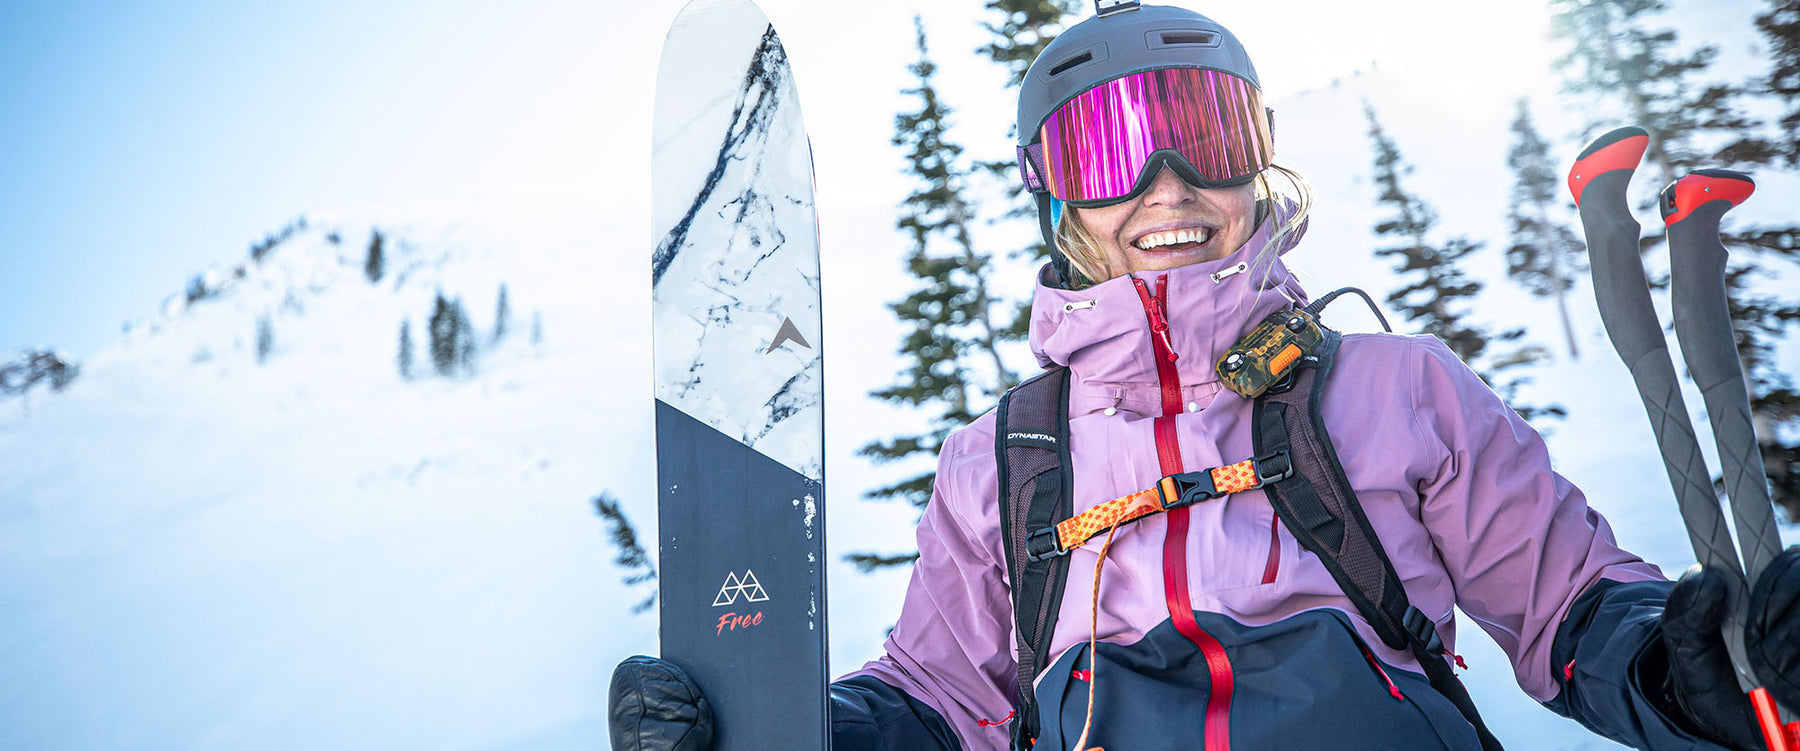 Dynastar skis may cause excessive smiling